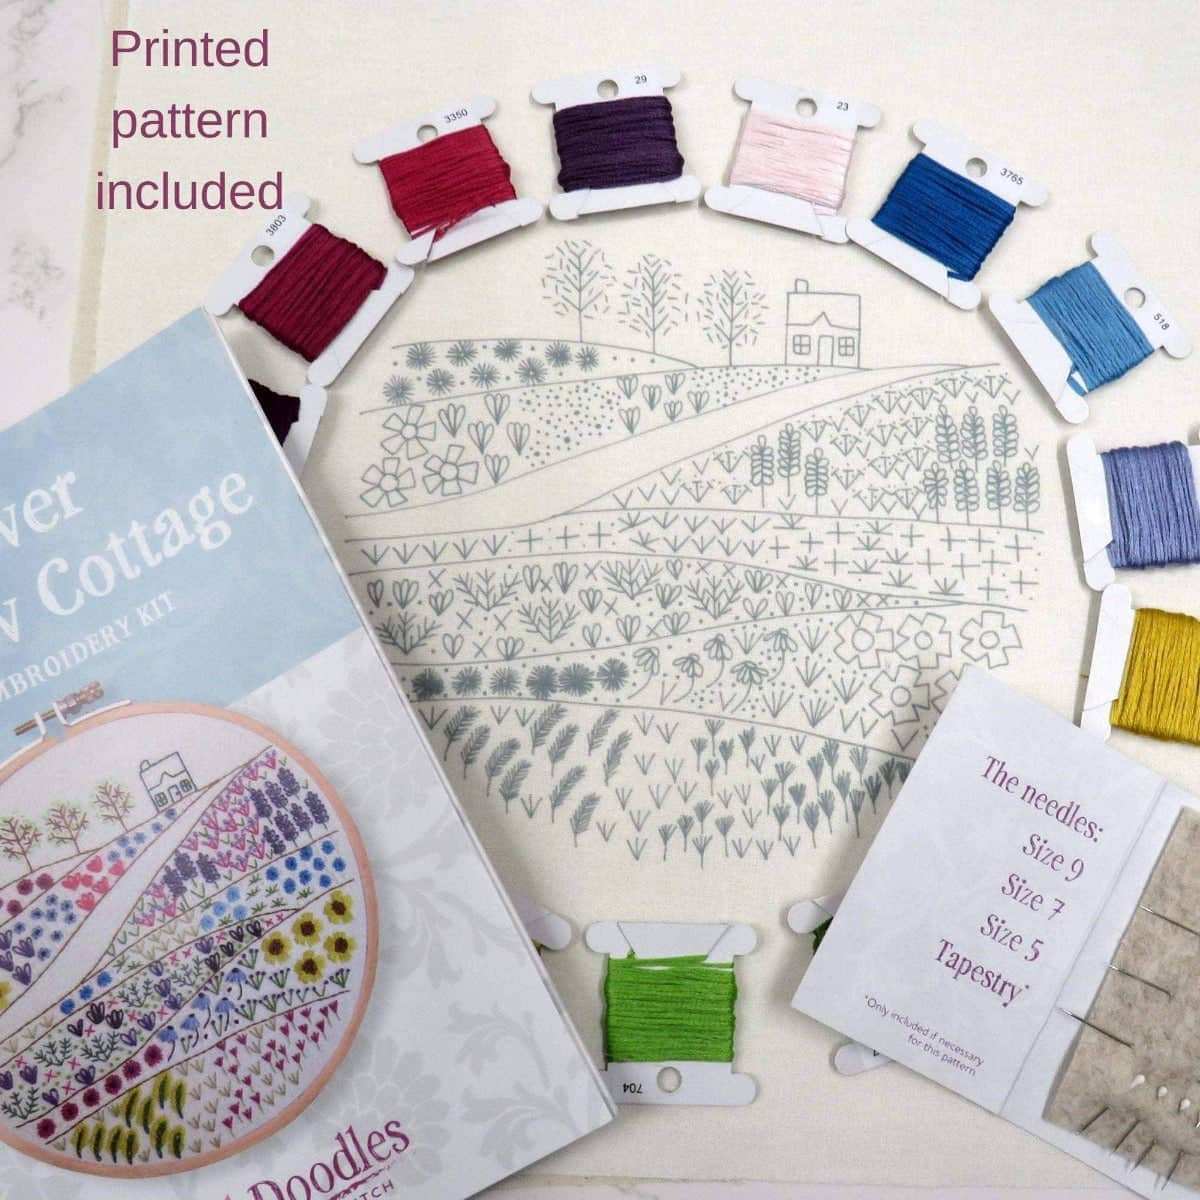 Flower Meadow Cottage Hand Embroidery Kit , Embroidery Kit , StitchDoodles , beginner embroidery, Embroidery, embroidery hoop kit, Embroidery Kit, embroidery kits for adults, embroidery kits for beginners, flower embroidery, hand embroidery, hand embroidery fabric, hand embroidery hoop, hand embroidery kit, hand embroidery pattern, hand embroidery thread, hand stitching, modern embroidery kits, nurge embroidery hoop, unique embroidery kits, wildlife embroidery , StitchDoodles , shop.stitchdoodles.com